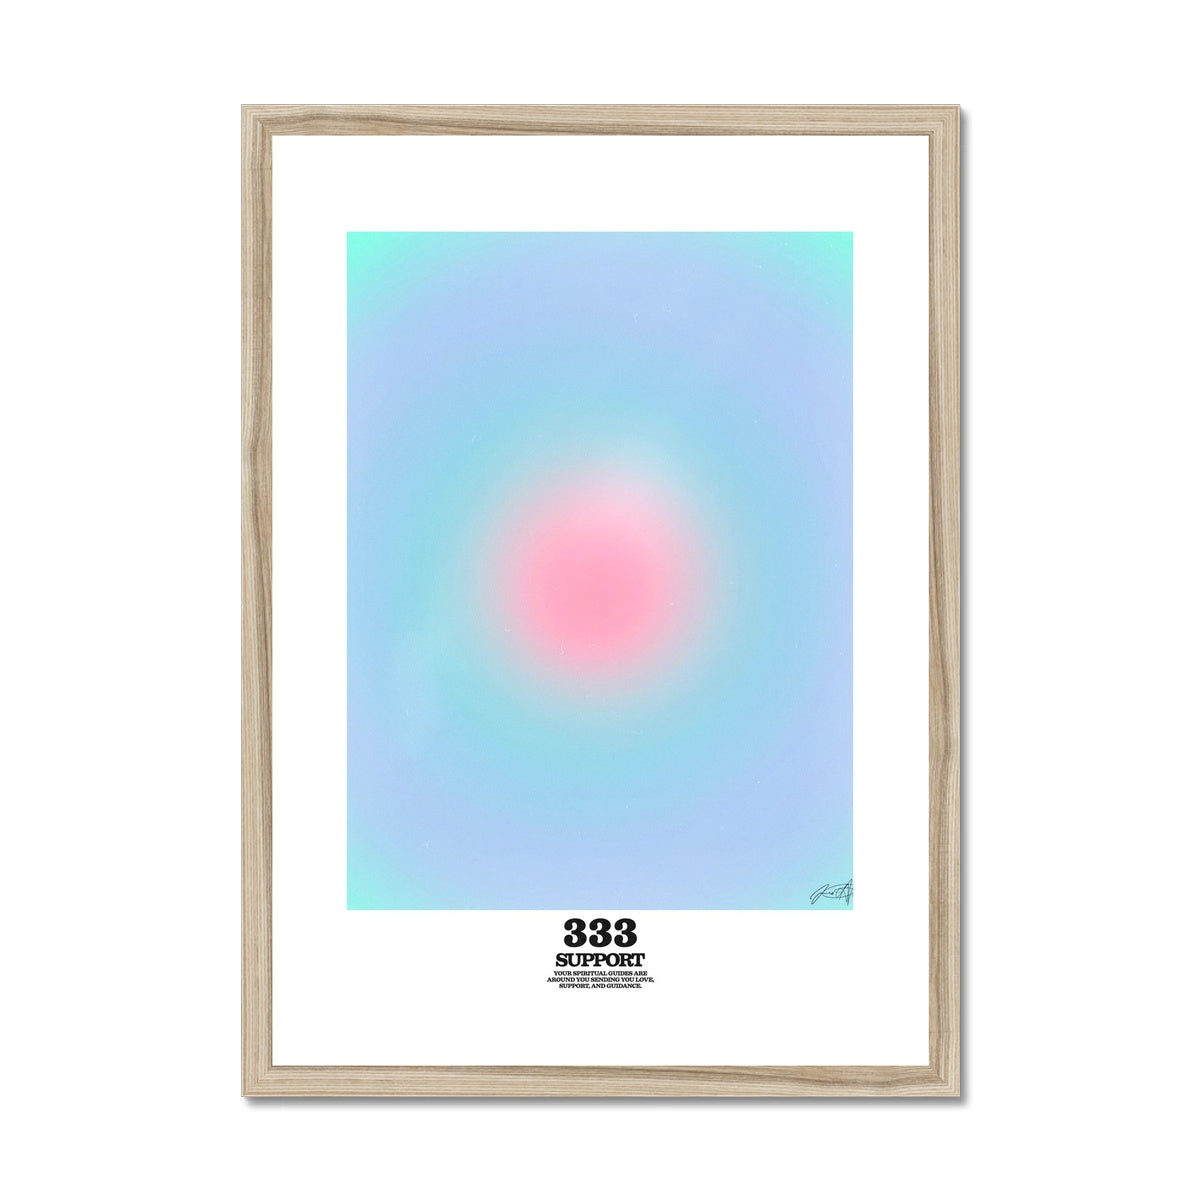 An angel number art print with a gradient aura. Add a touch of angel energy to your walls with a angel number auras. The perfect wall art posters to create a soft and dreamy aesthetic with your apartment or dorm decor. 333 Support: Your Spiritual Guides Are All Around You Sending You Love, Support And Guidance.